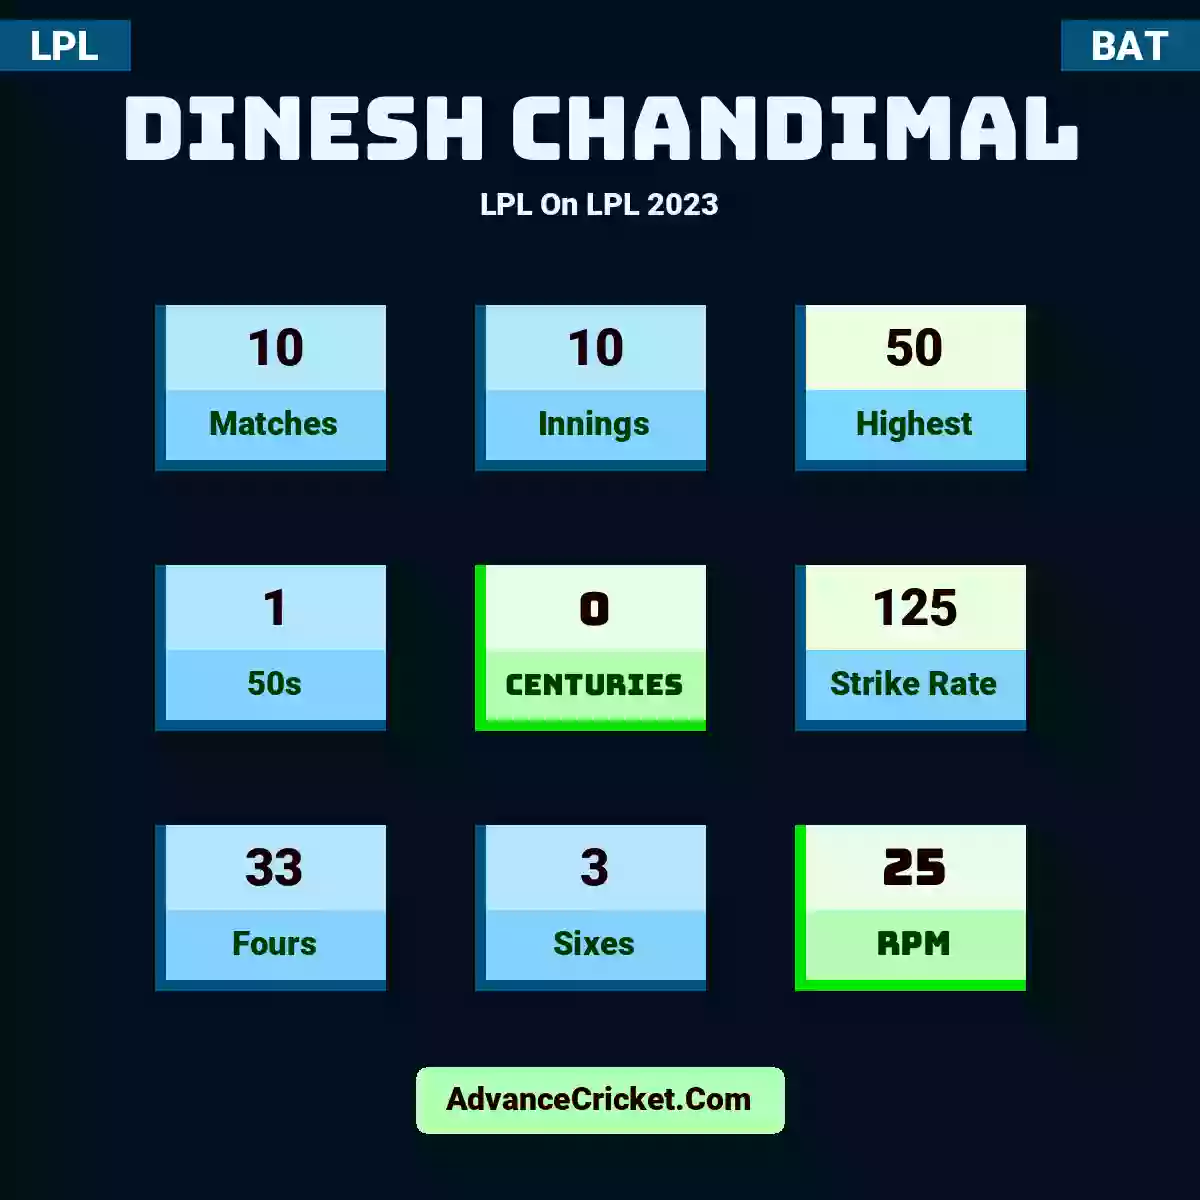 Dinesh Chandimal LPL  On LPL 2023, Dinesh Chandimal played 10 matches, scored 50 runs as highest, 1 half-centuries, and 0 centuries, with a strike rate of 125. D.Chandimal hit 33 fours and 3 sixes, with an RPM of 25.